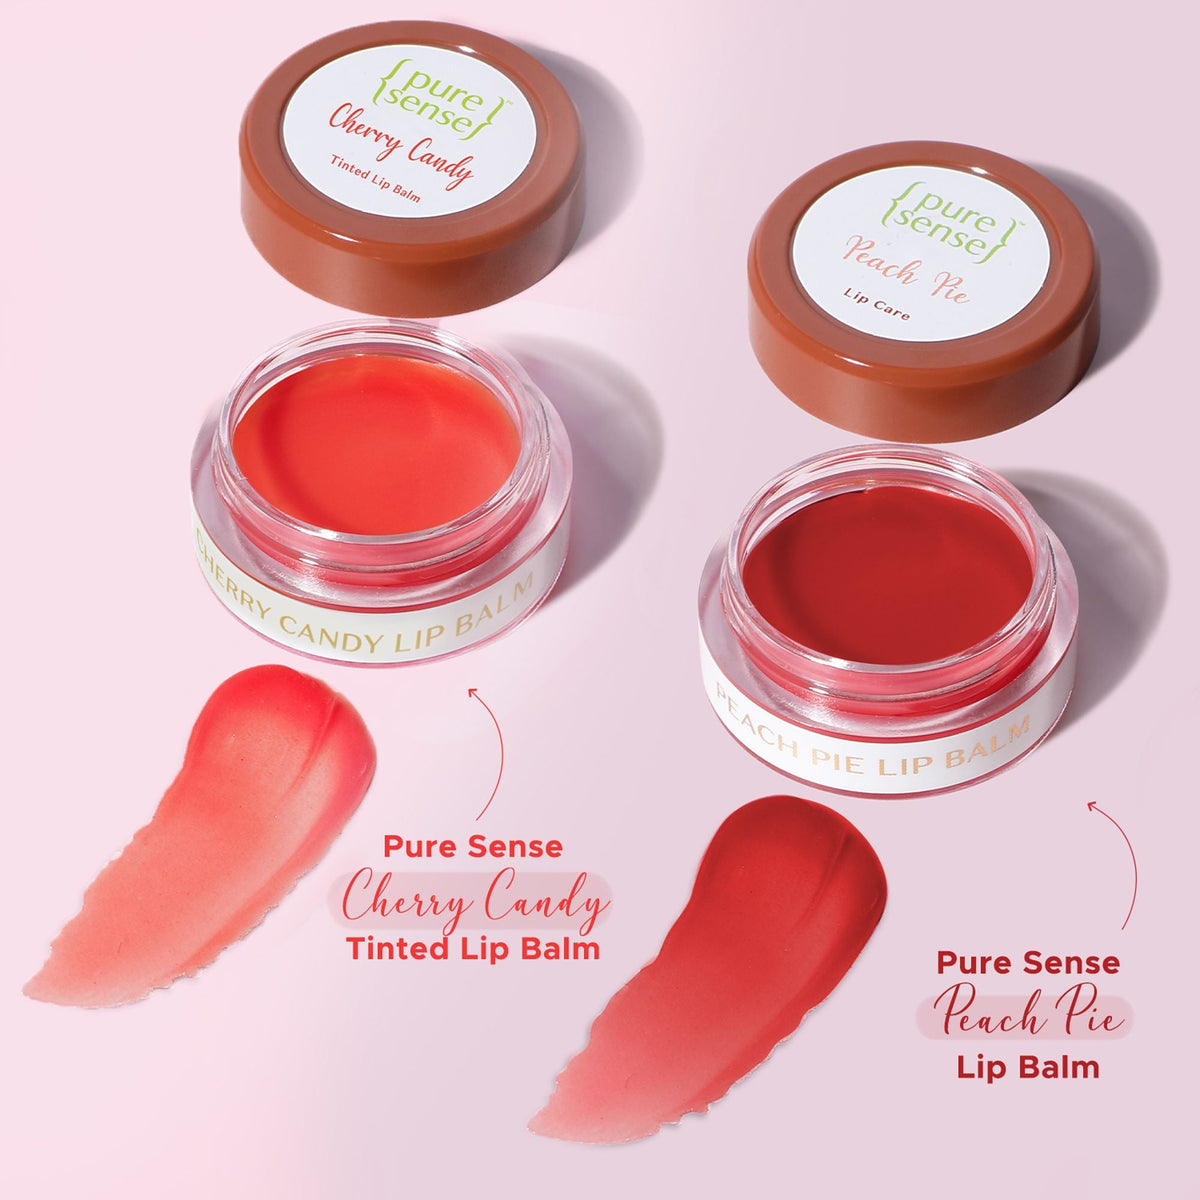 [CRED] Cherry Candy Tinted Lip Balm 5ml + Pure Sense Strawberry Slush Lip Balm 5m | Pack of 2 | From the makers of Parachute Advansed | 10ml